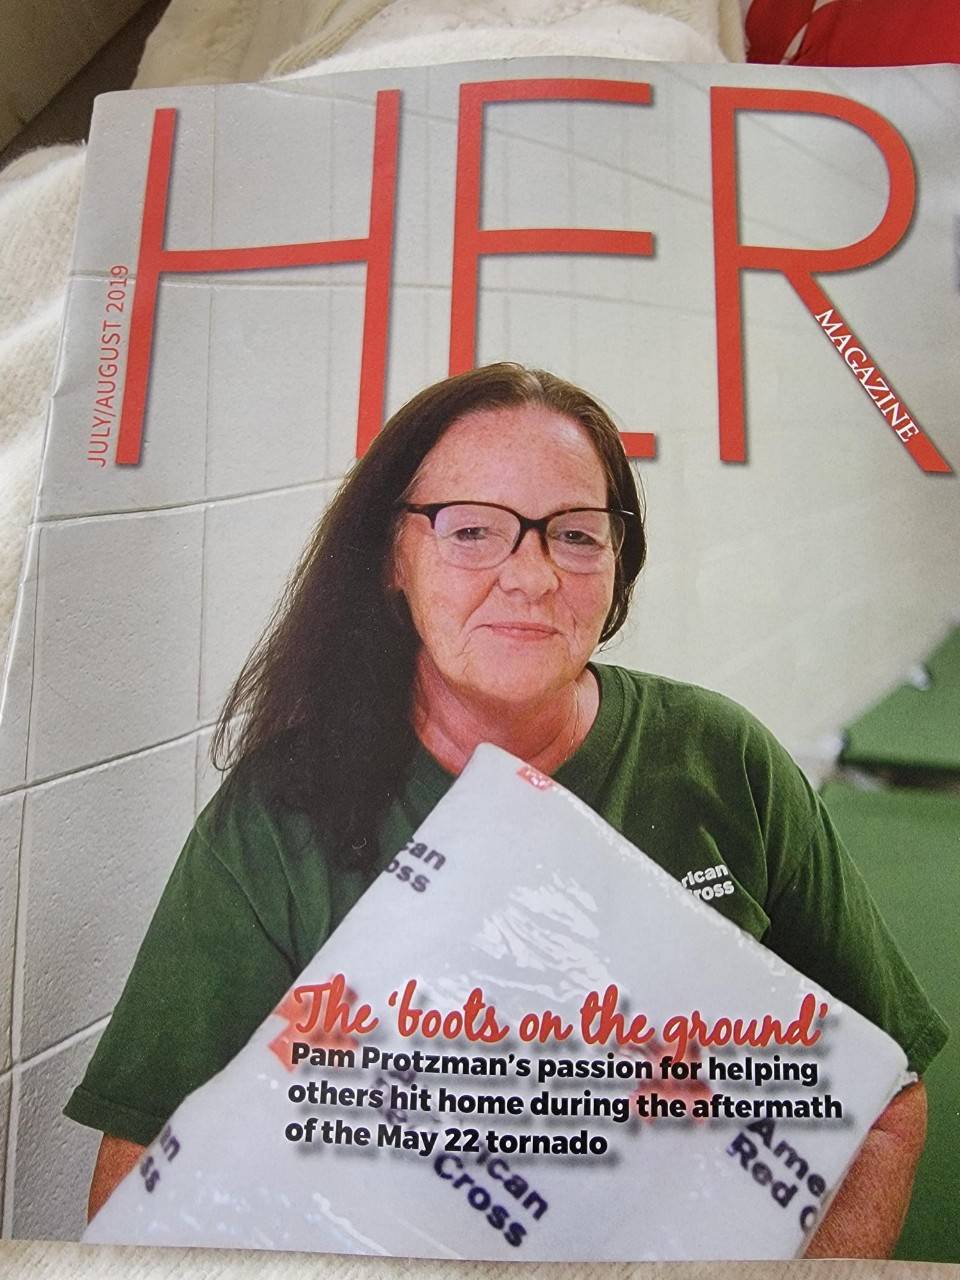 pam protzman on the cover of HER magazine